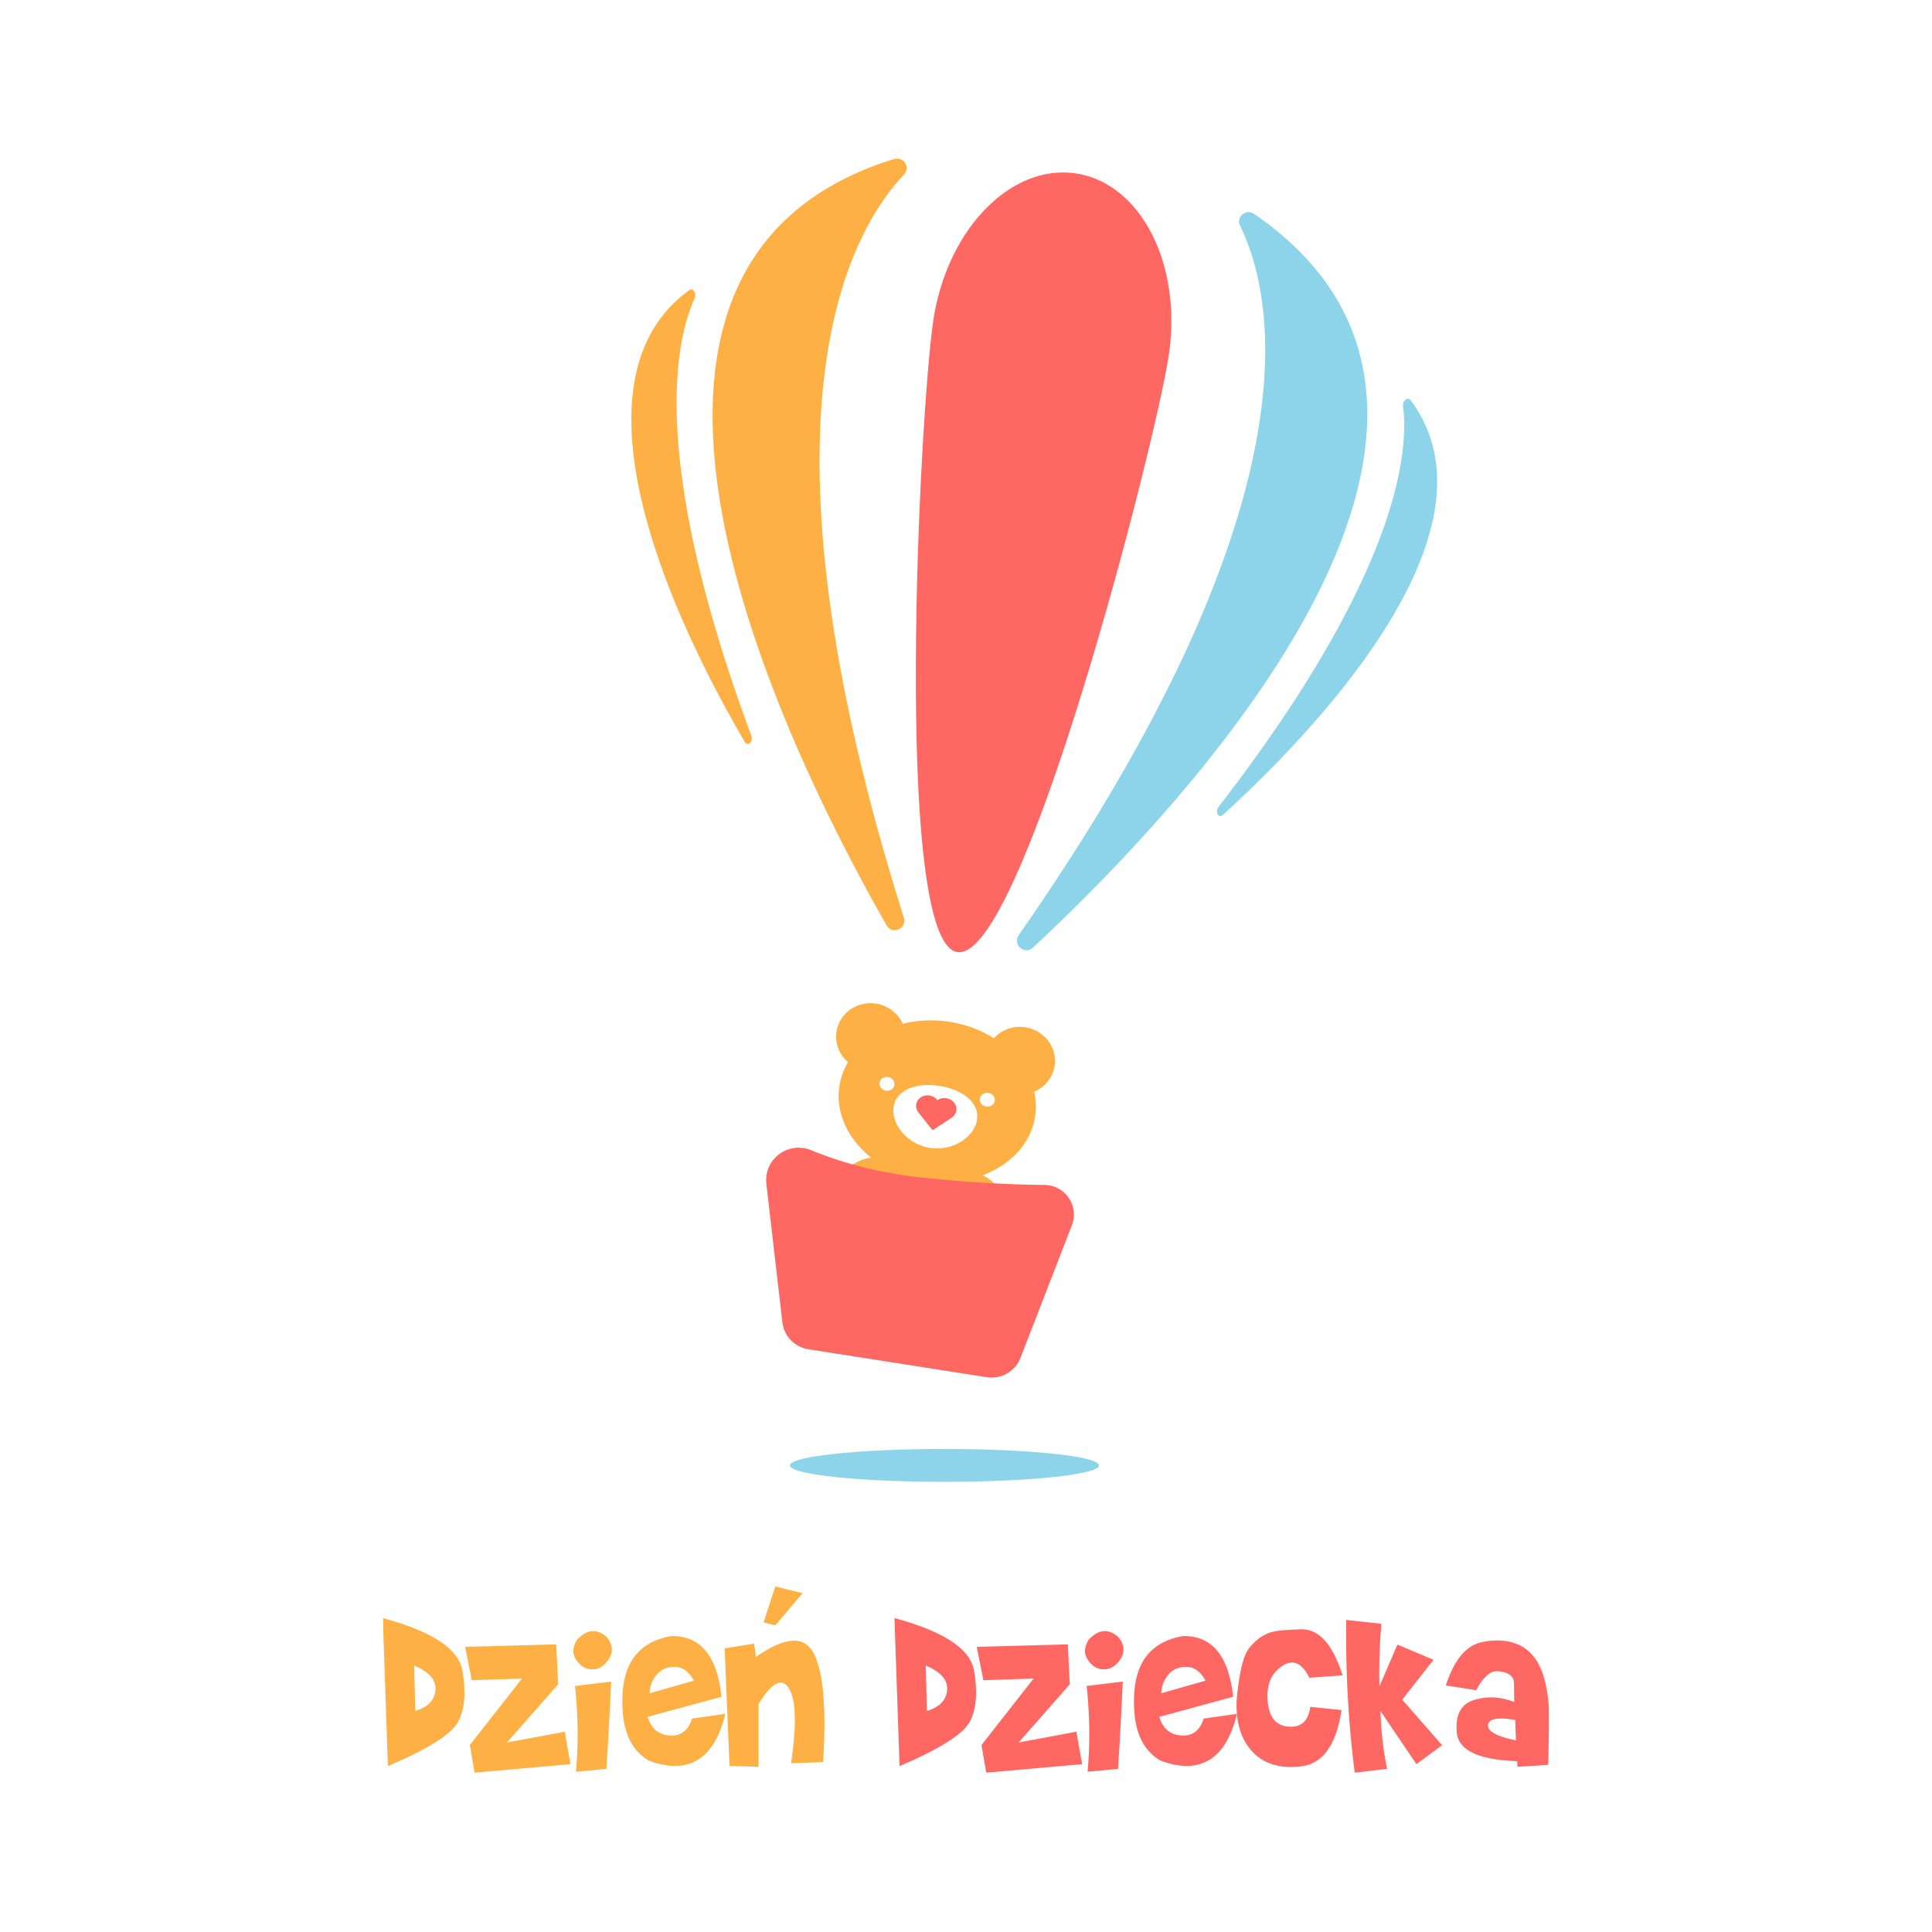 Dzien Dziecka logo design by logo designer Sparrow Design for your inspiration and for the worlds largest logo competition